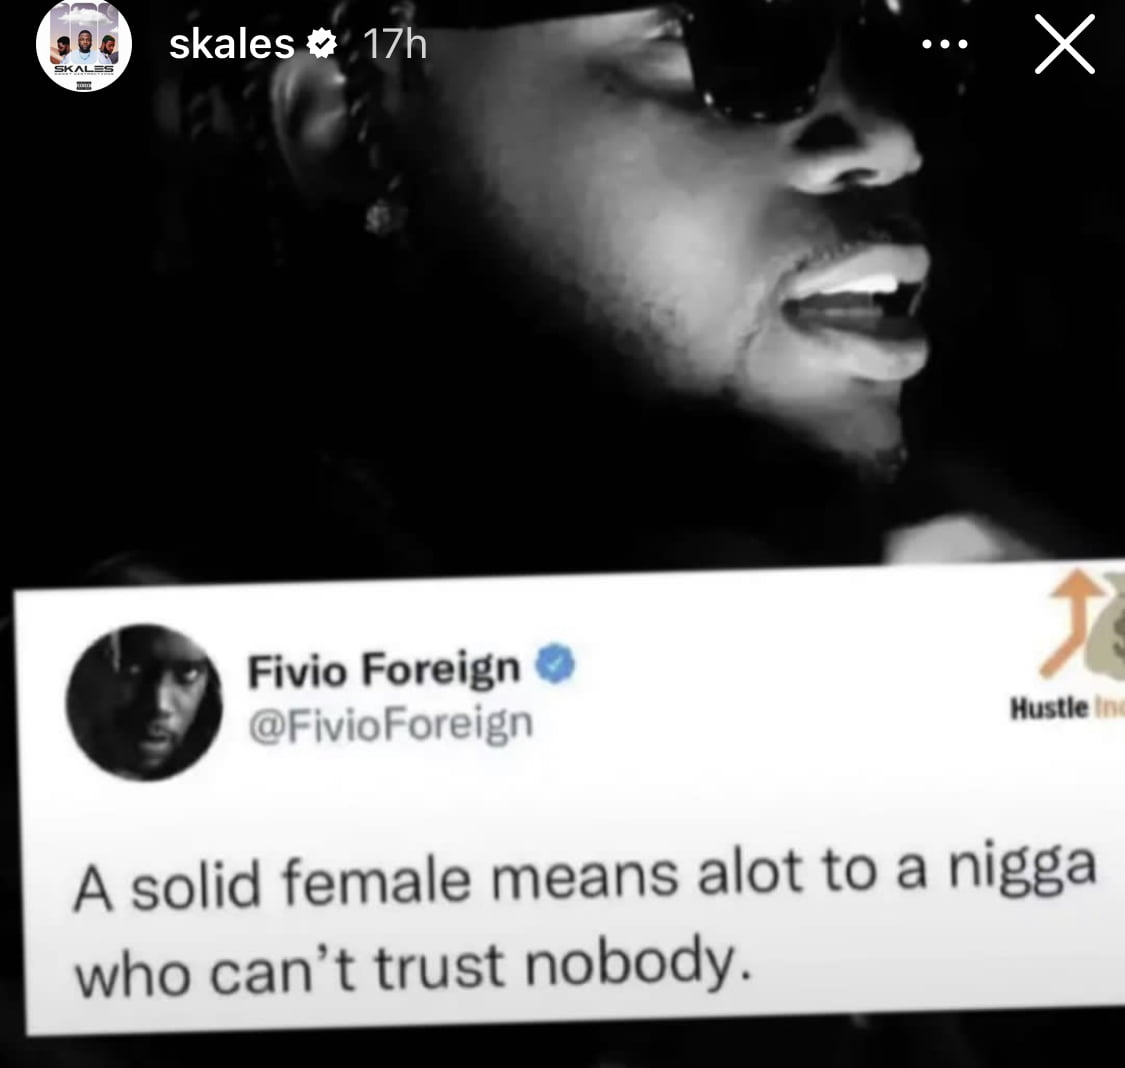 Don’t marry a heartless person - Musician Skales unfollows wife